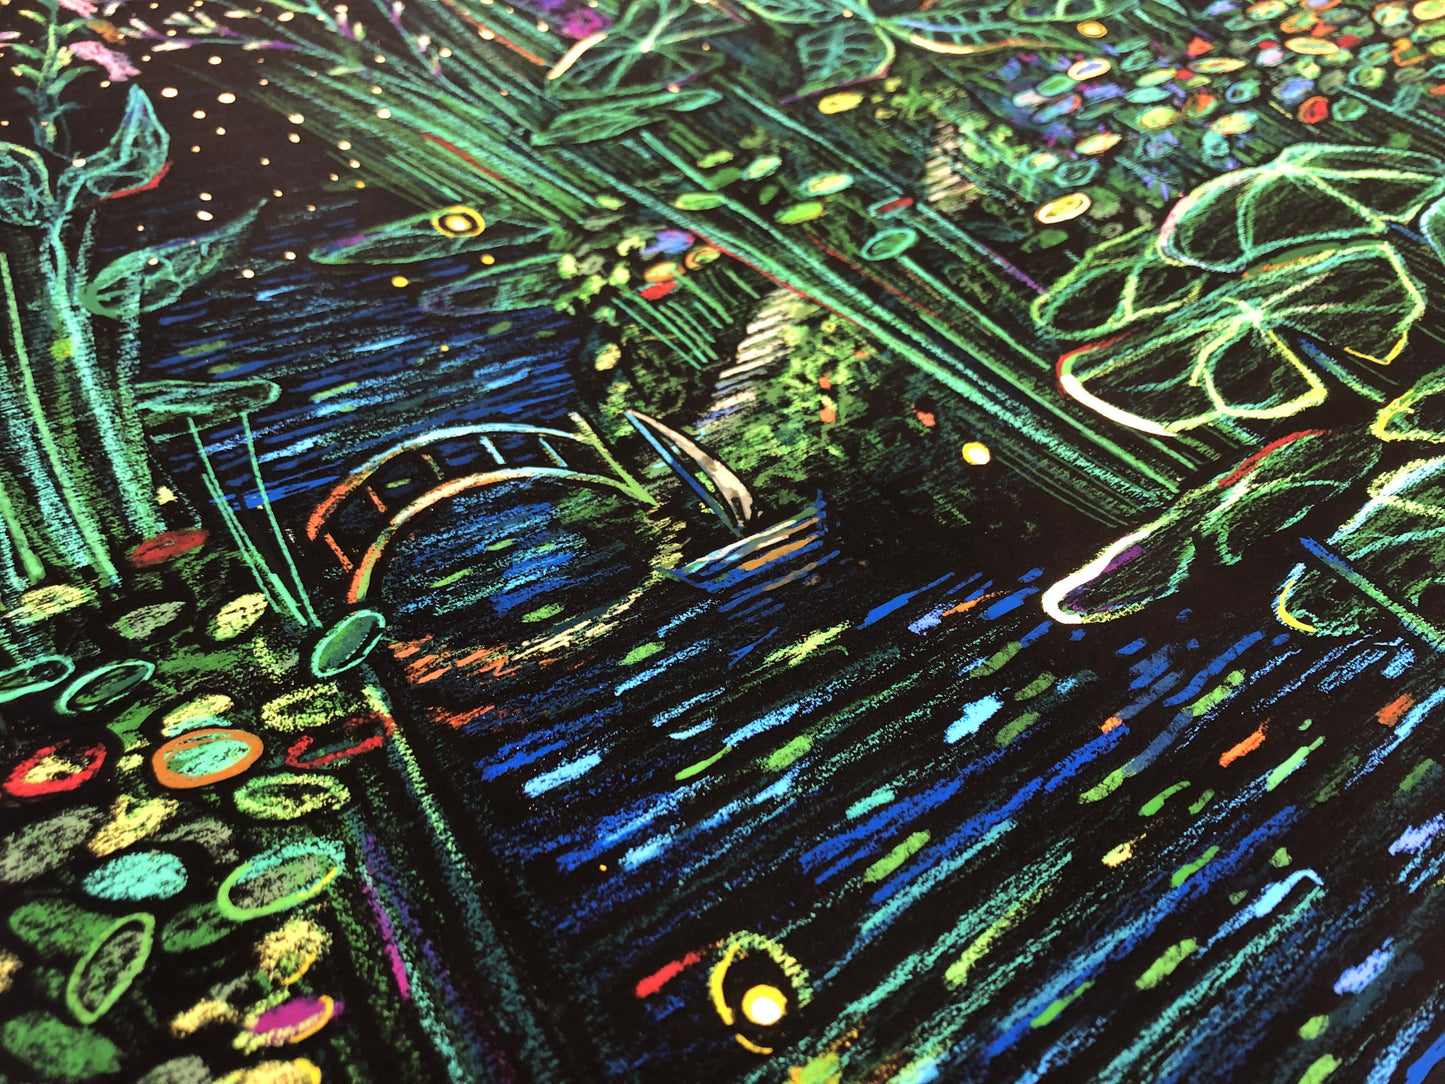 The Universe Blooming (Silverleaf Edition of 170) Print James R. Eads